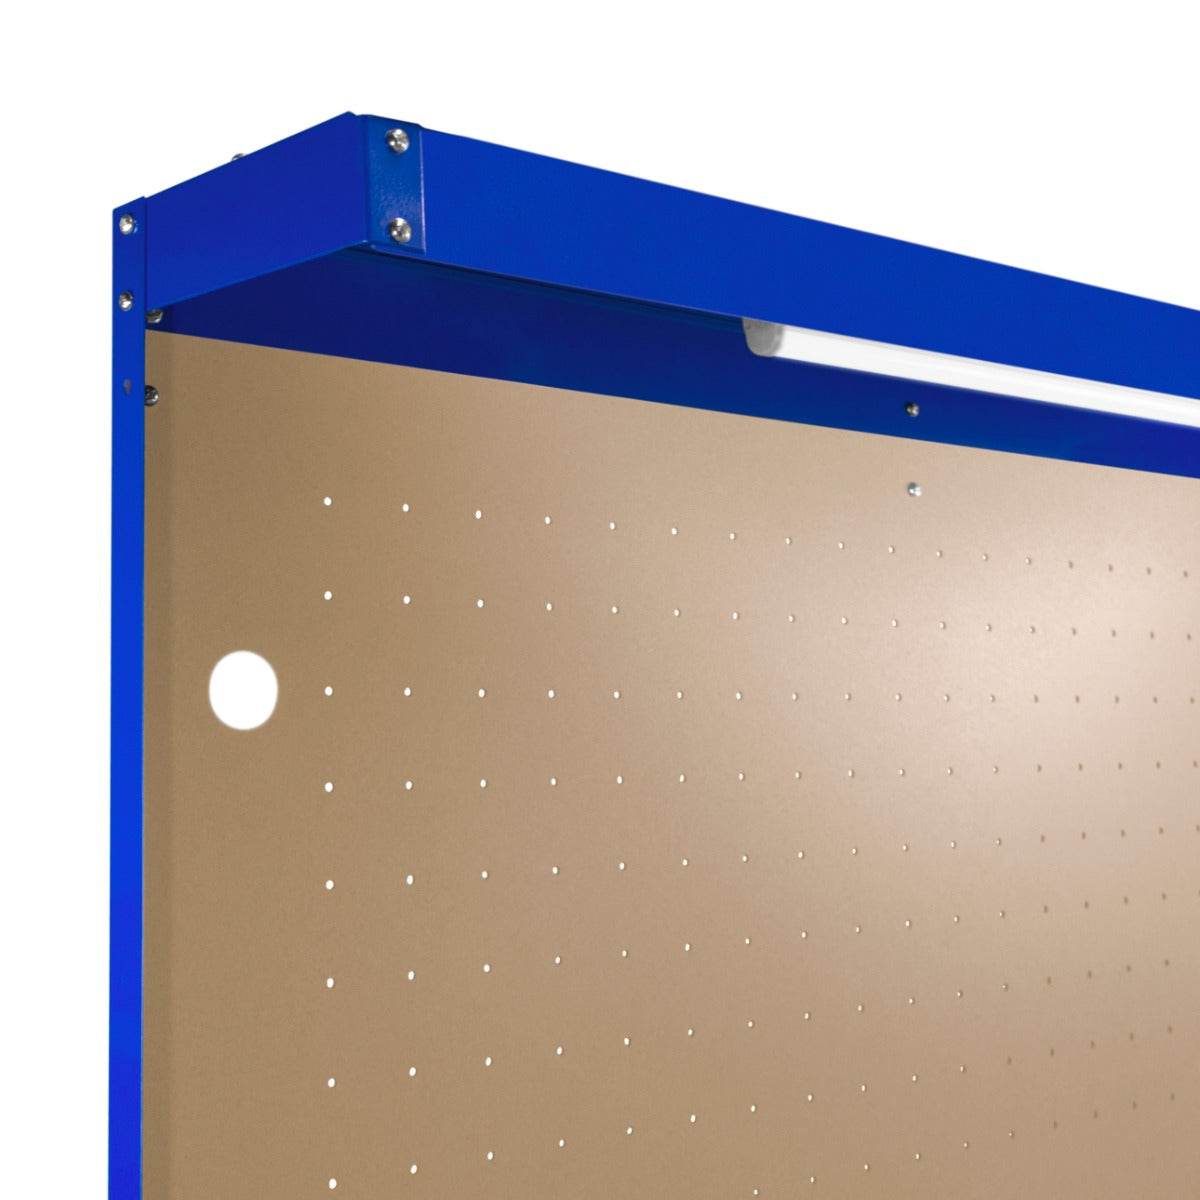 Workbench with Pegboard, Drawer & Light – Blue